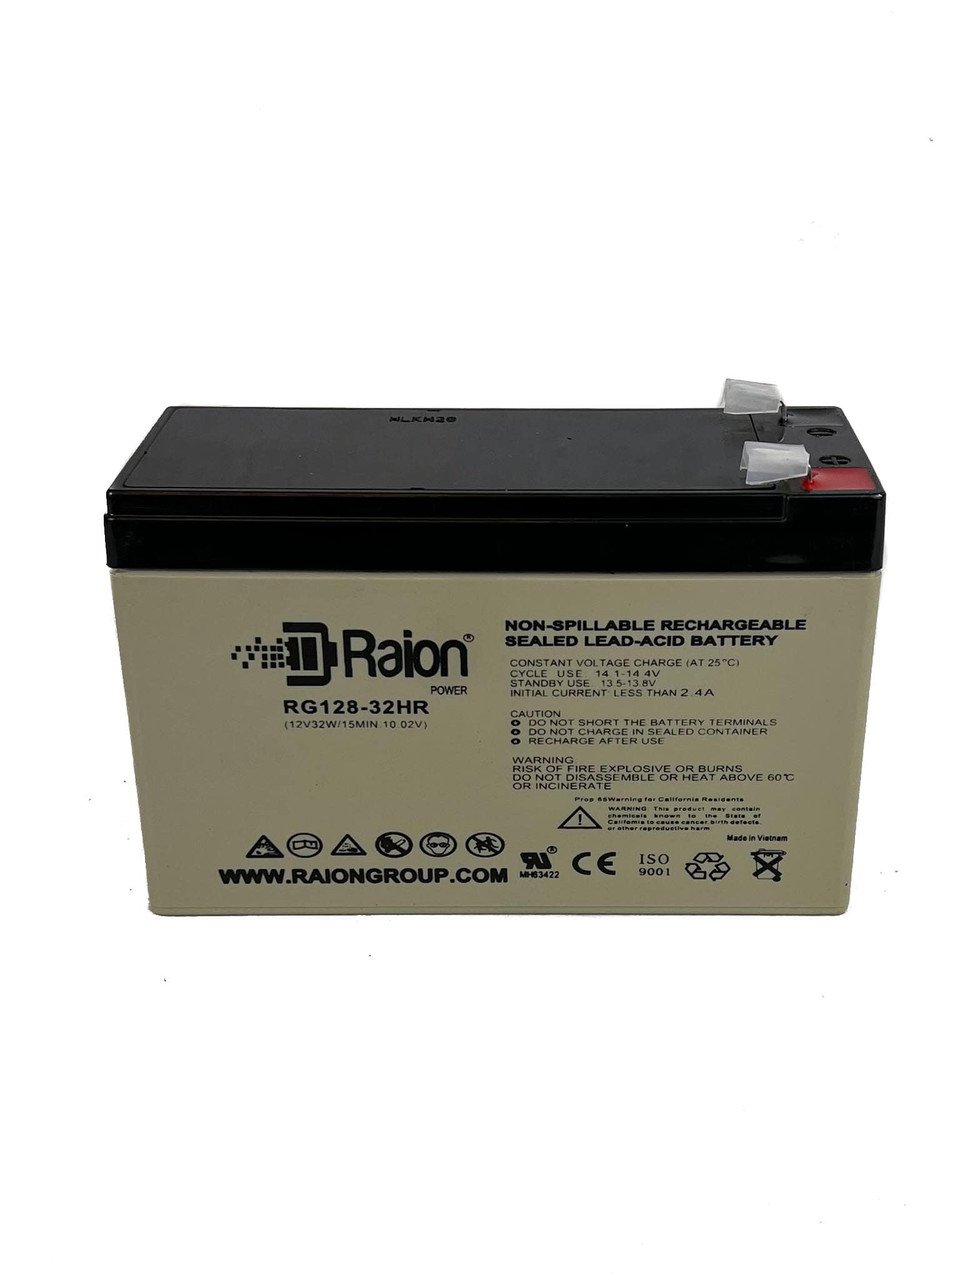 Raion Power RG128-32HR Replacement High Rate Battery Cartridge for APC Back-UPS Pro 280VA BP280I